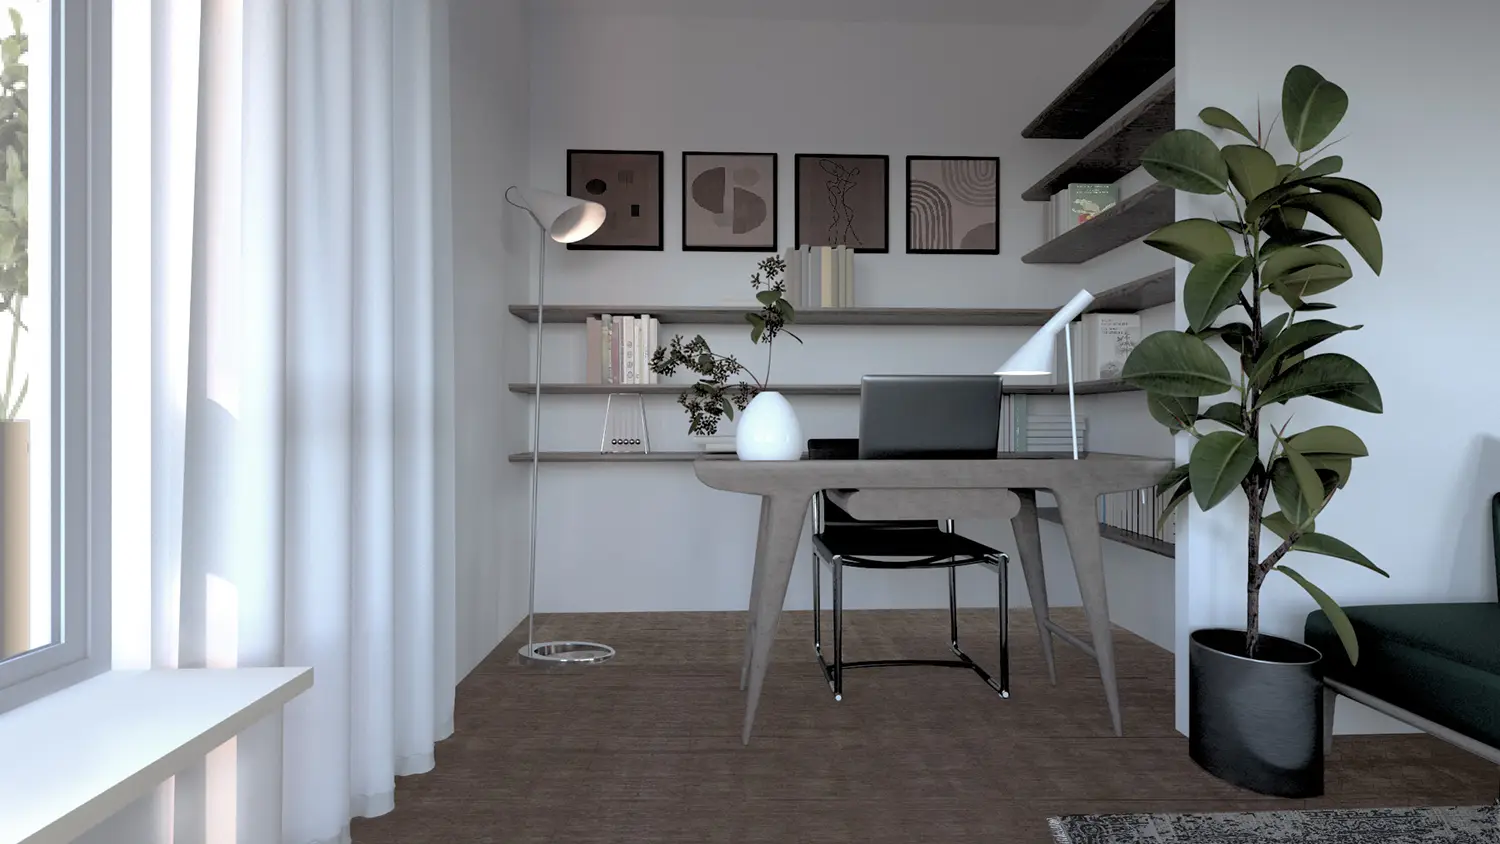 Photo-realistic of a desk area designed by Elles Interior Design during a turnkey renovation.